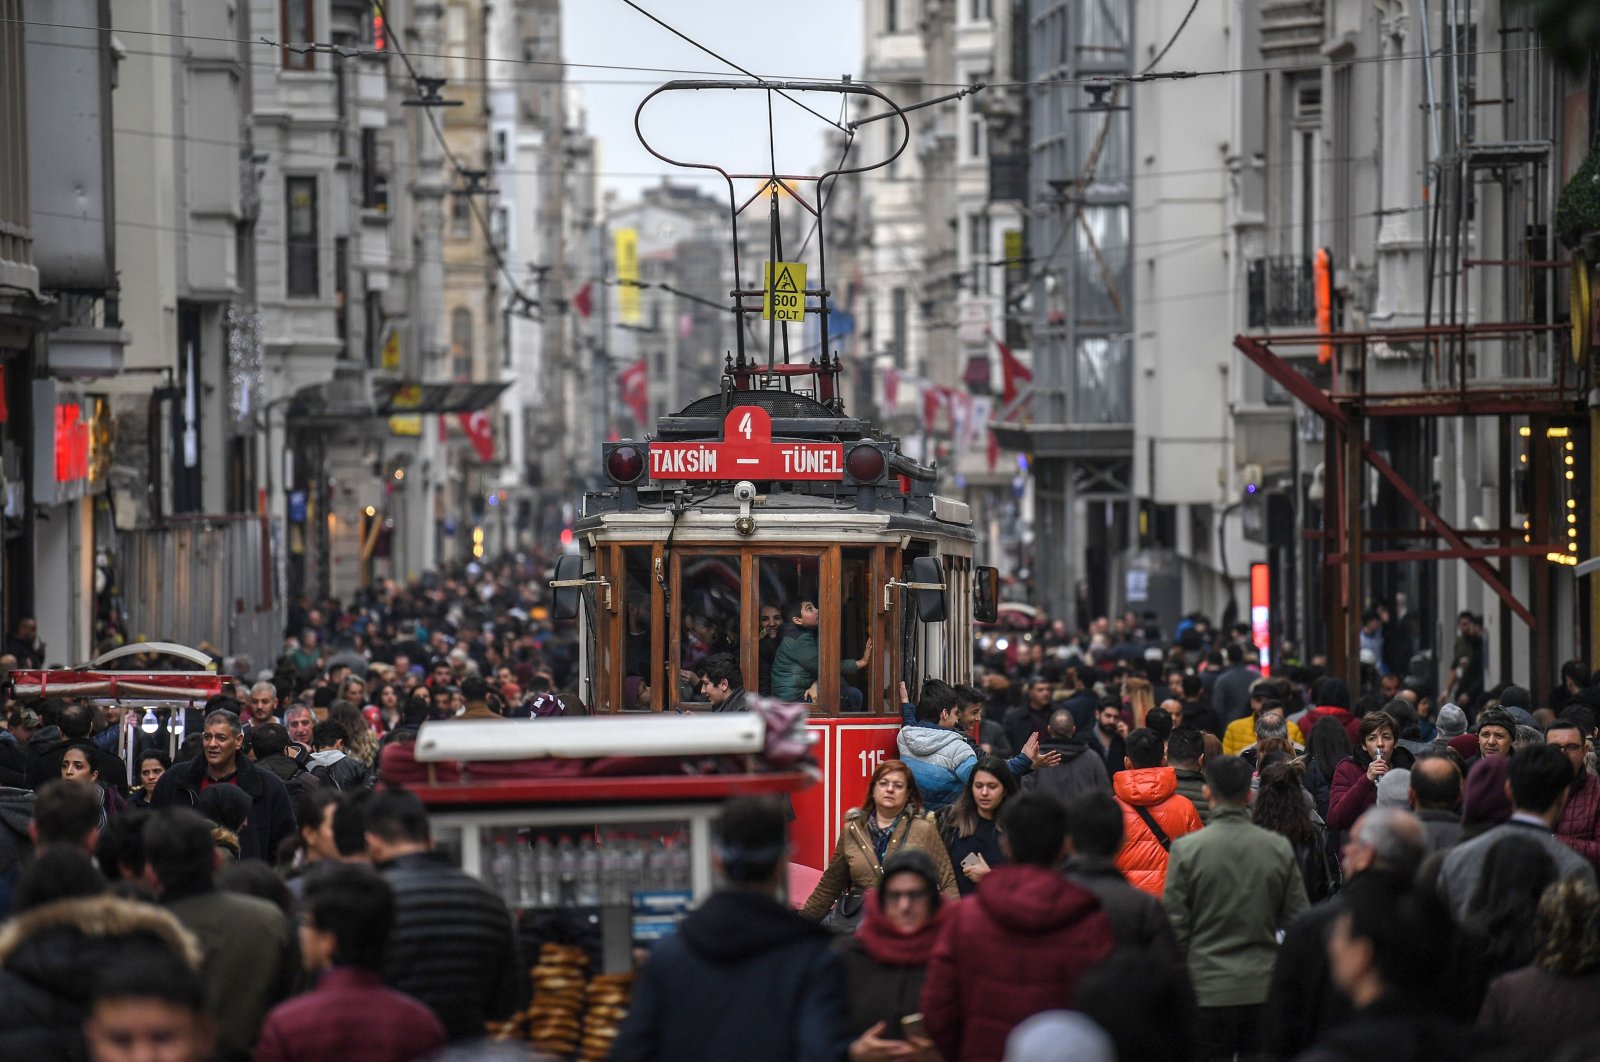 A nostalgic tram drives through a crowd in İstiklal Avenue in Taksim, Istanbul, Jan. 25, 2019. (AFP Photo) 